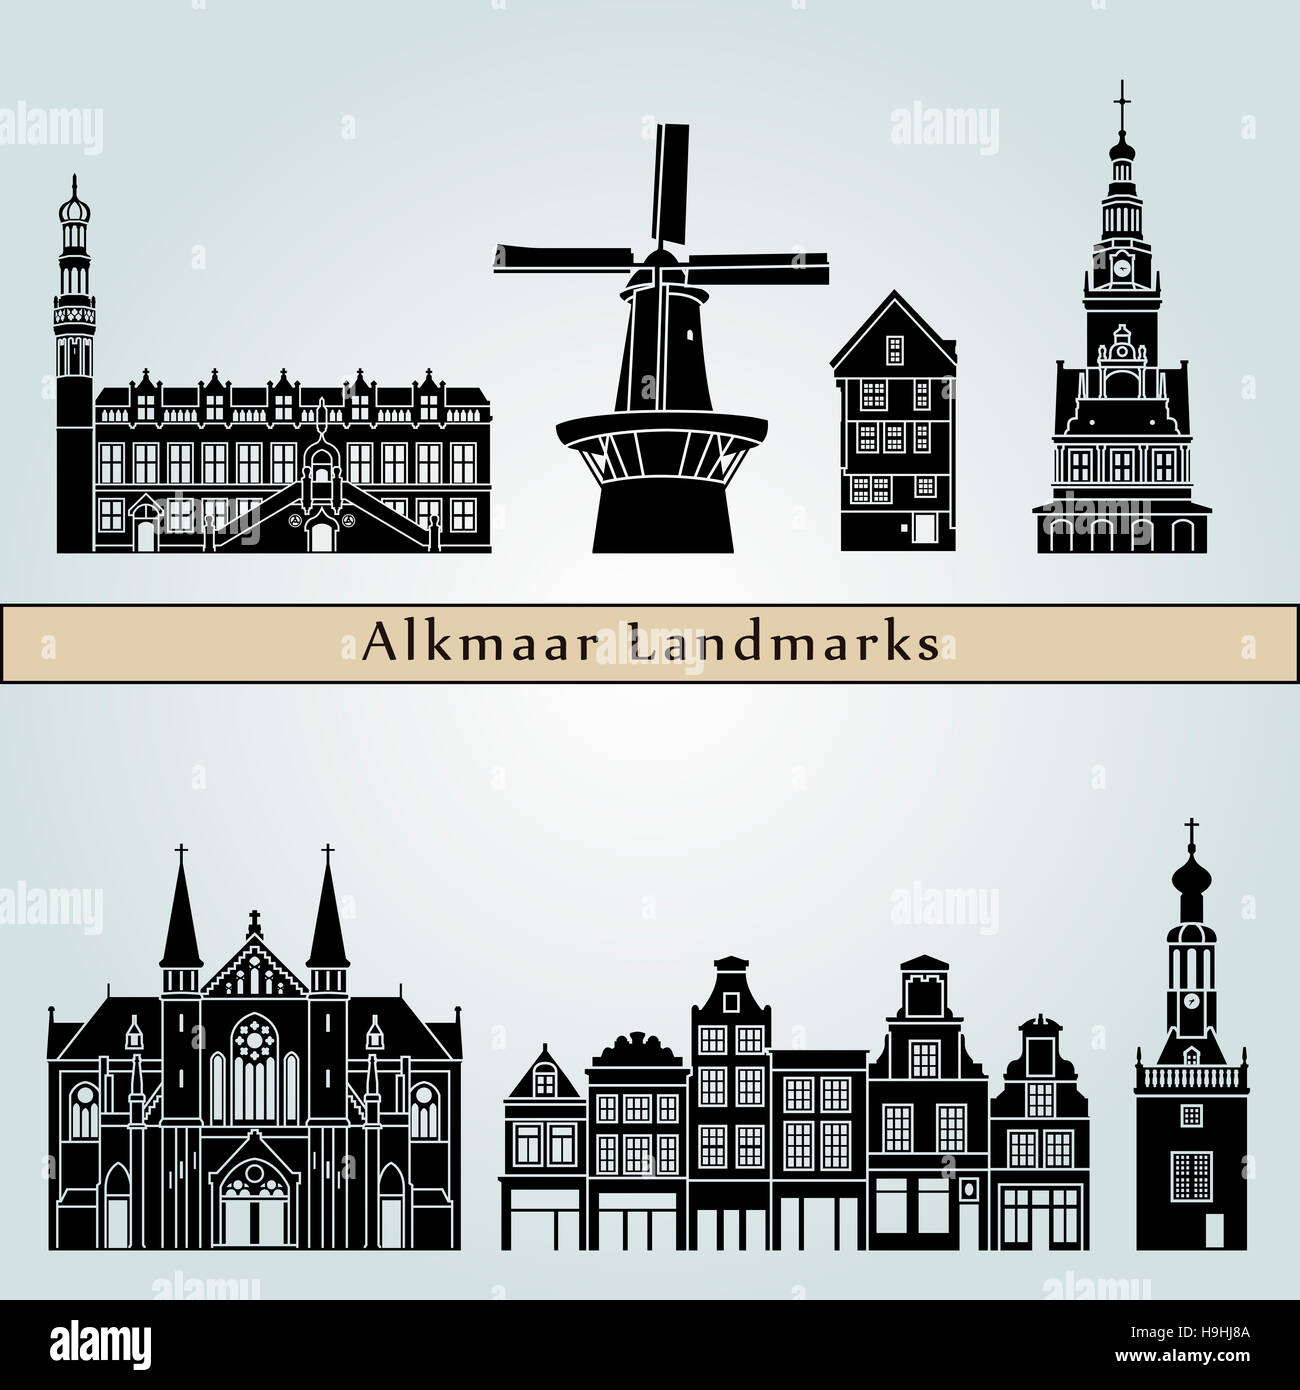 Alkmaar landmarks and monuments isolated on blue background in editable vector file Stock Photo